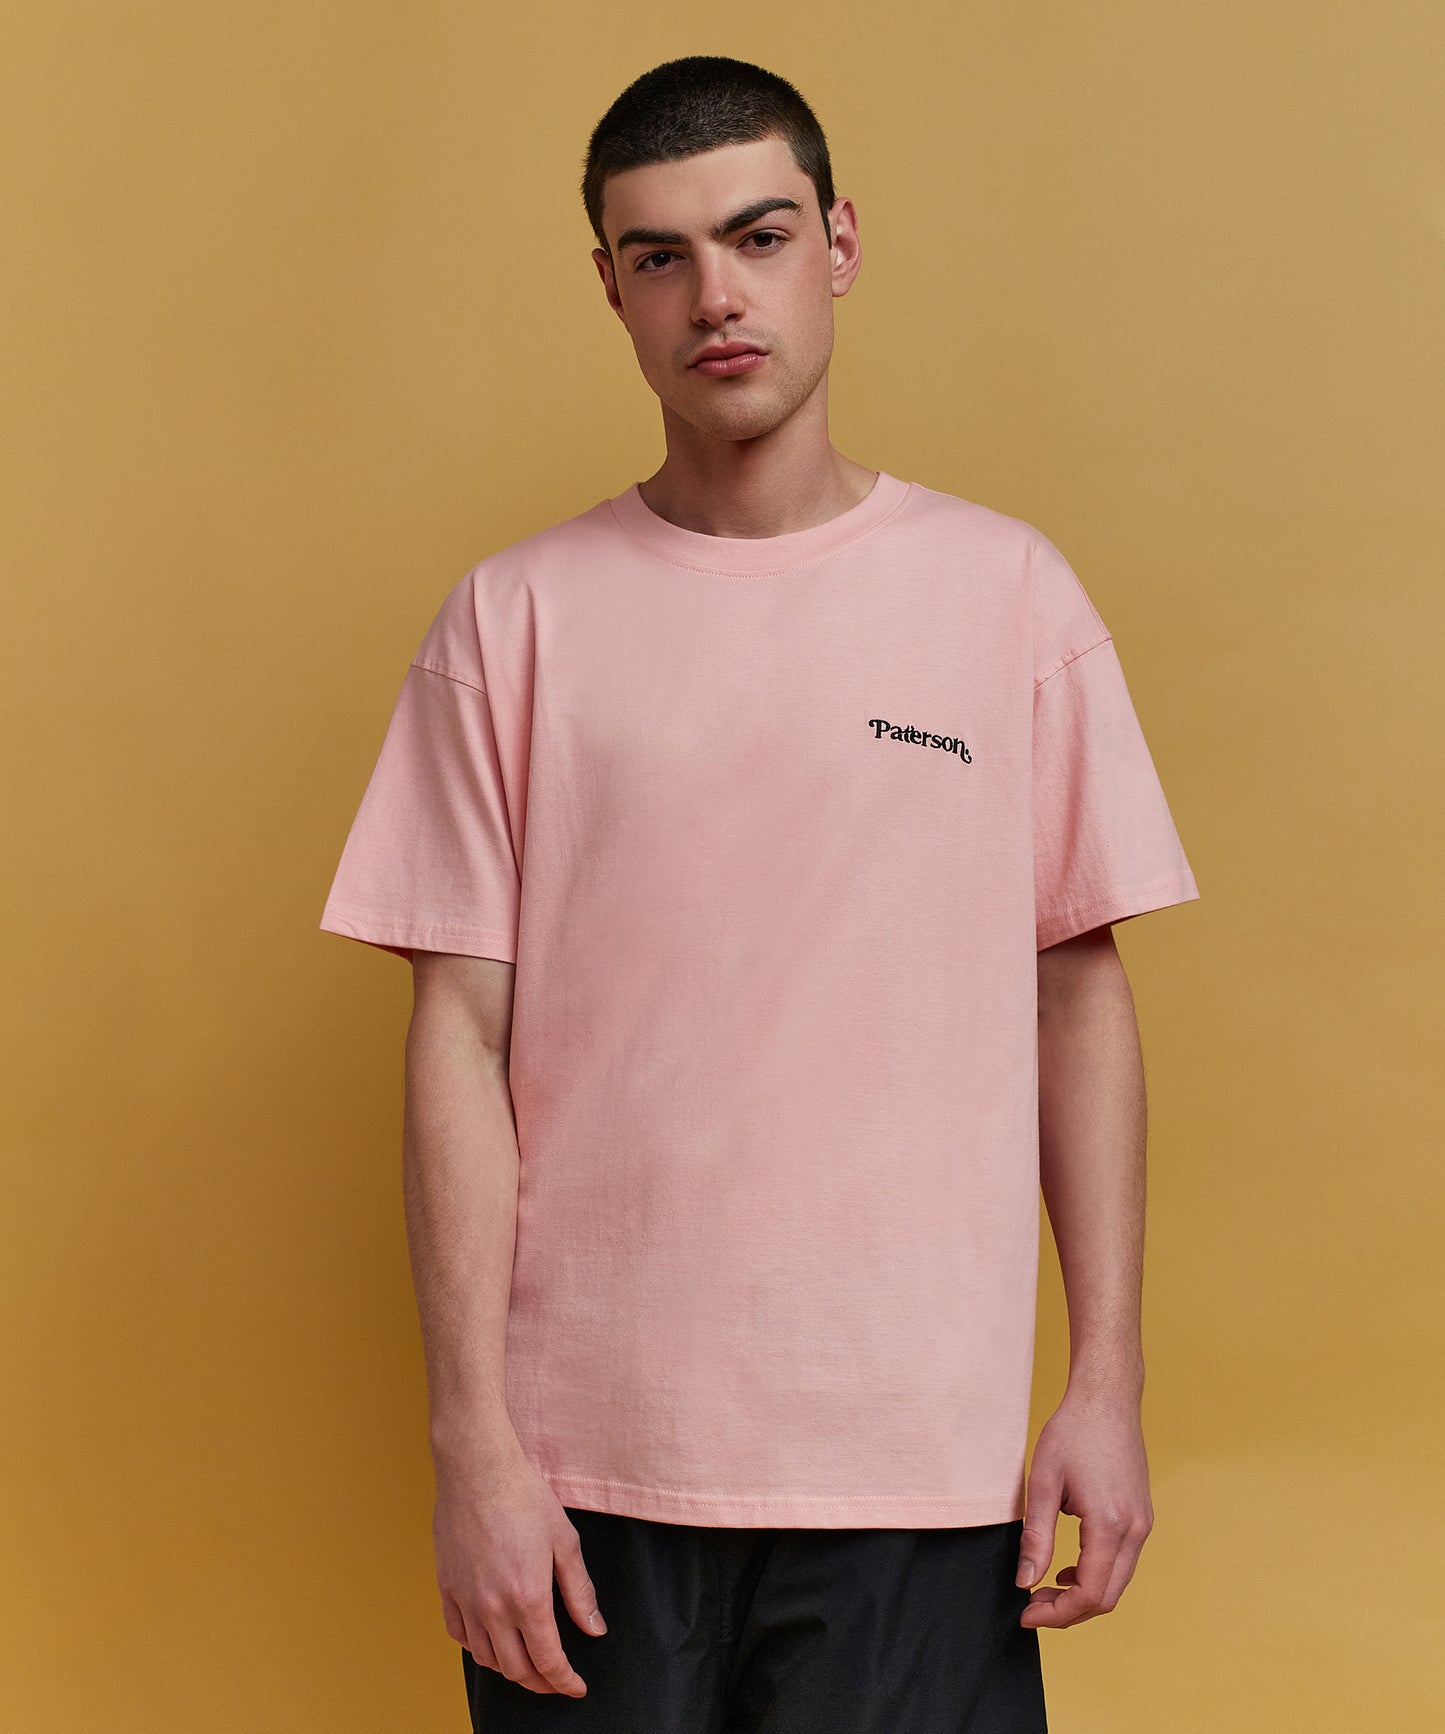 Stained Glass Short Sleeve Tee - Mauve